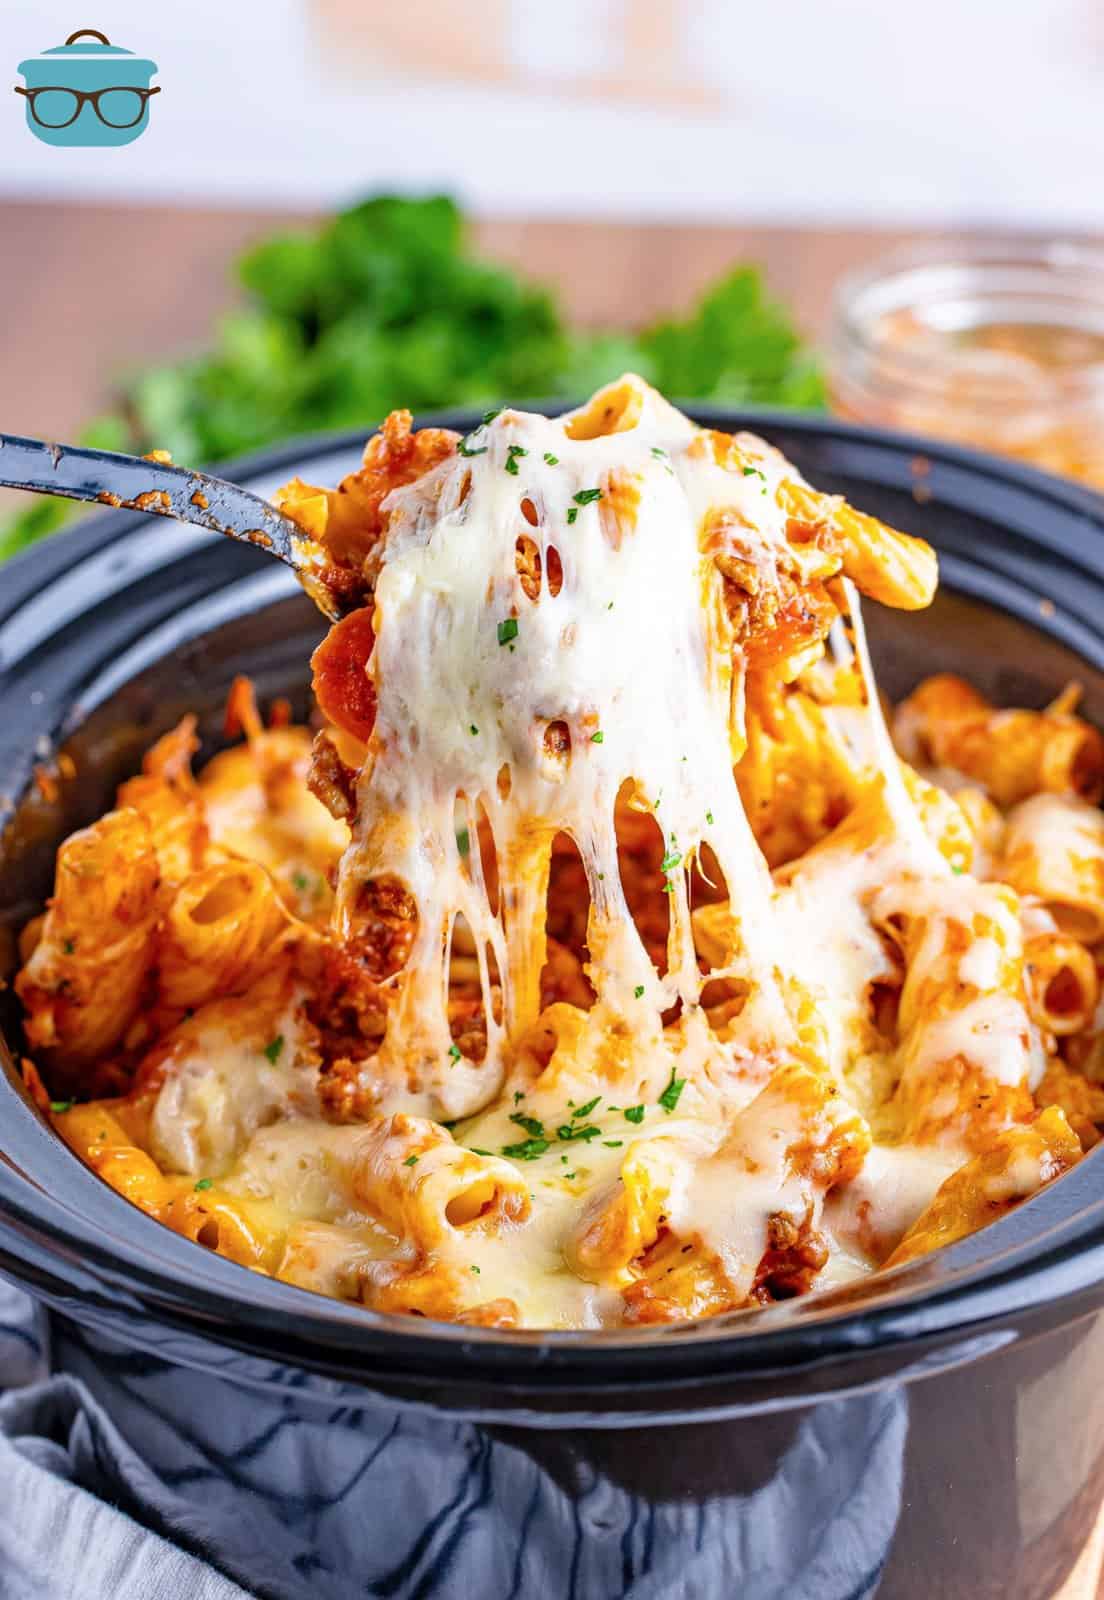 https://www.thecountrycook.net/wp-content/uploads/2023/09/1st-image-Crock-Pot-Pizza-Casserole-scaled.jpg